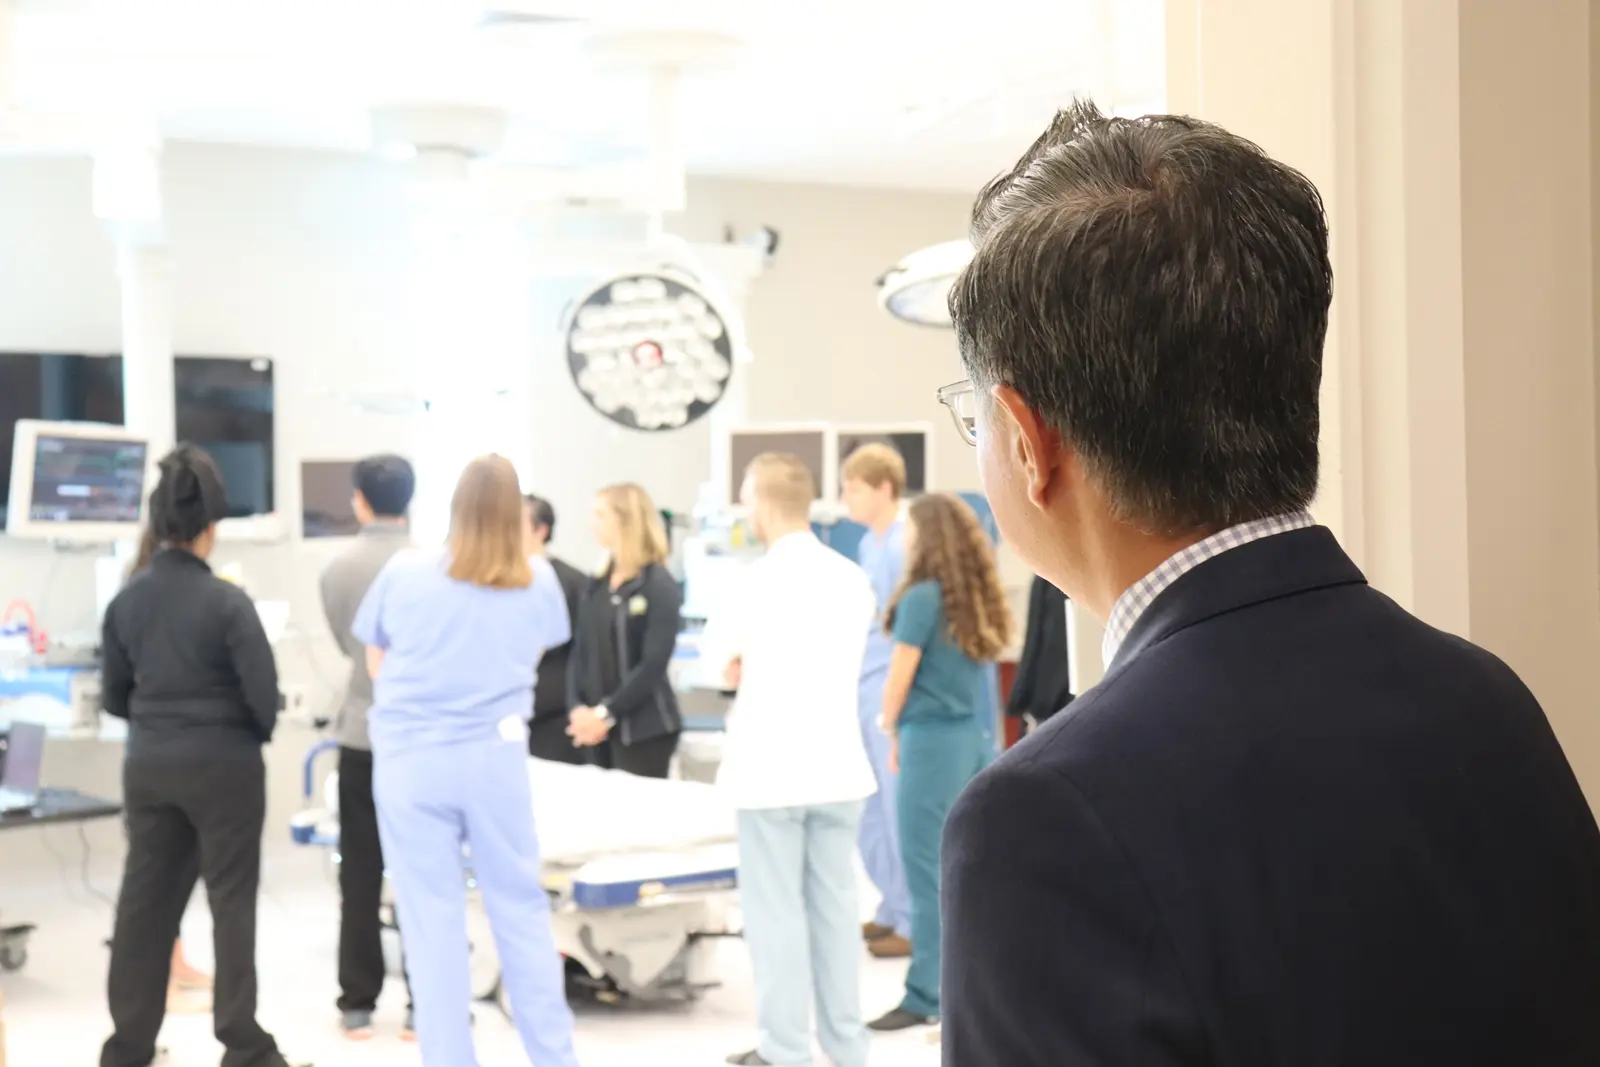 CAMLS A man in a suit stands in the foreground, looking into a bright room where a group of medical professionals in scrubs and lab coats are gathered. The room is equipped with medical equipment and monitors, suggesting a hospital or medical facility setting.